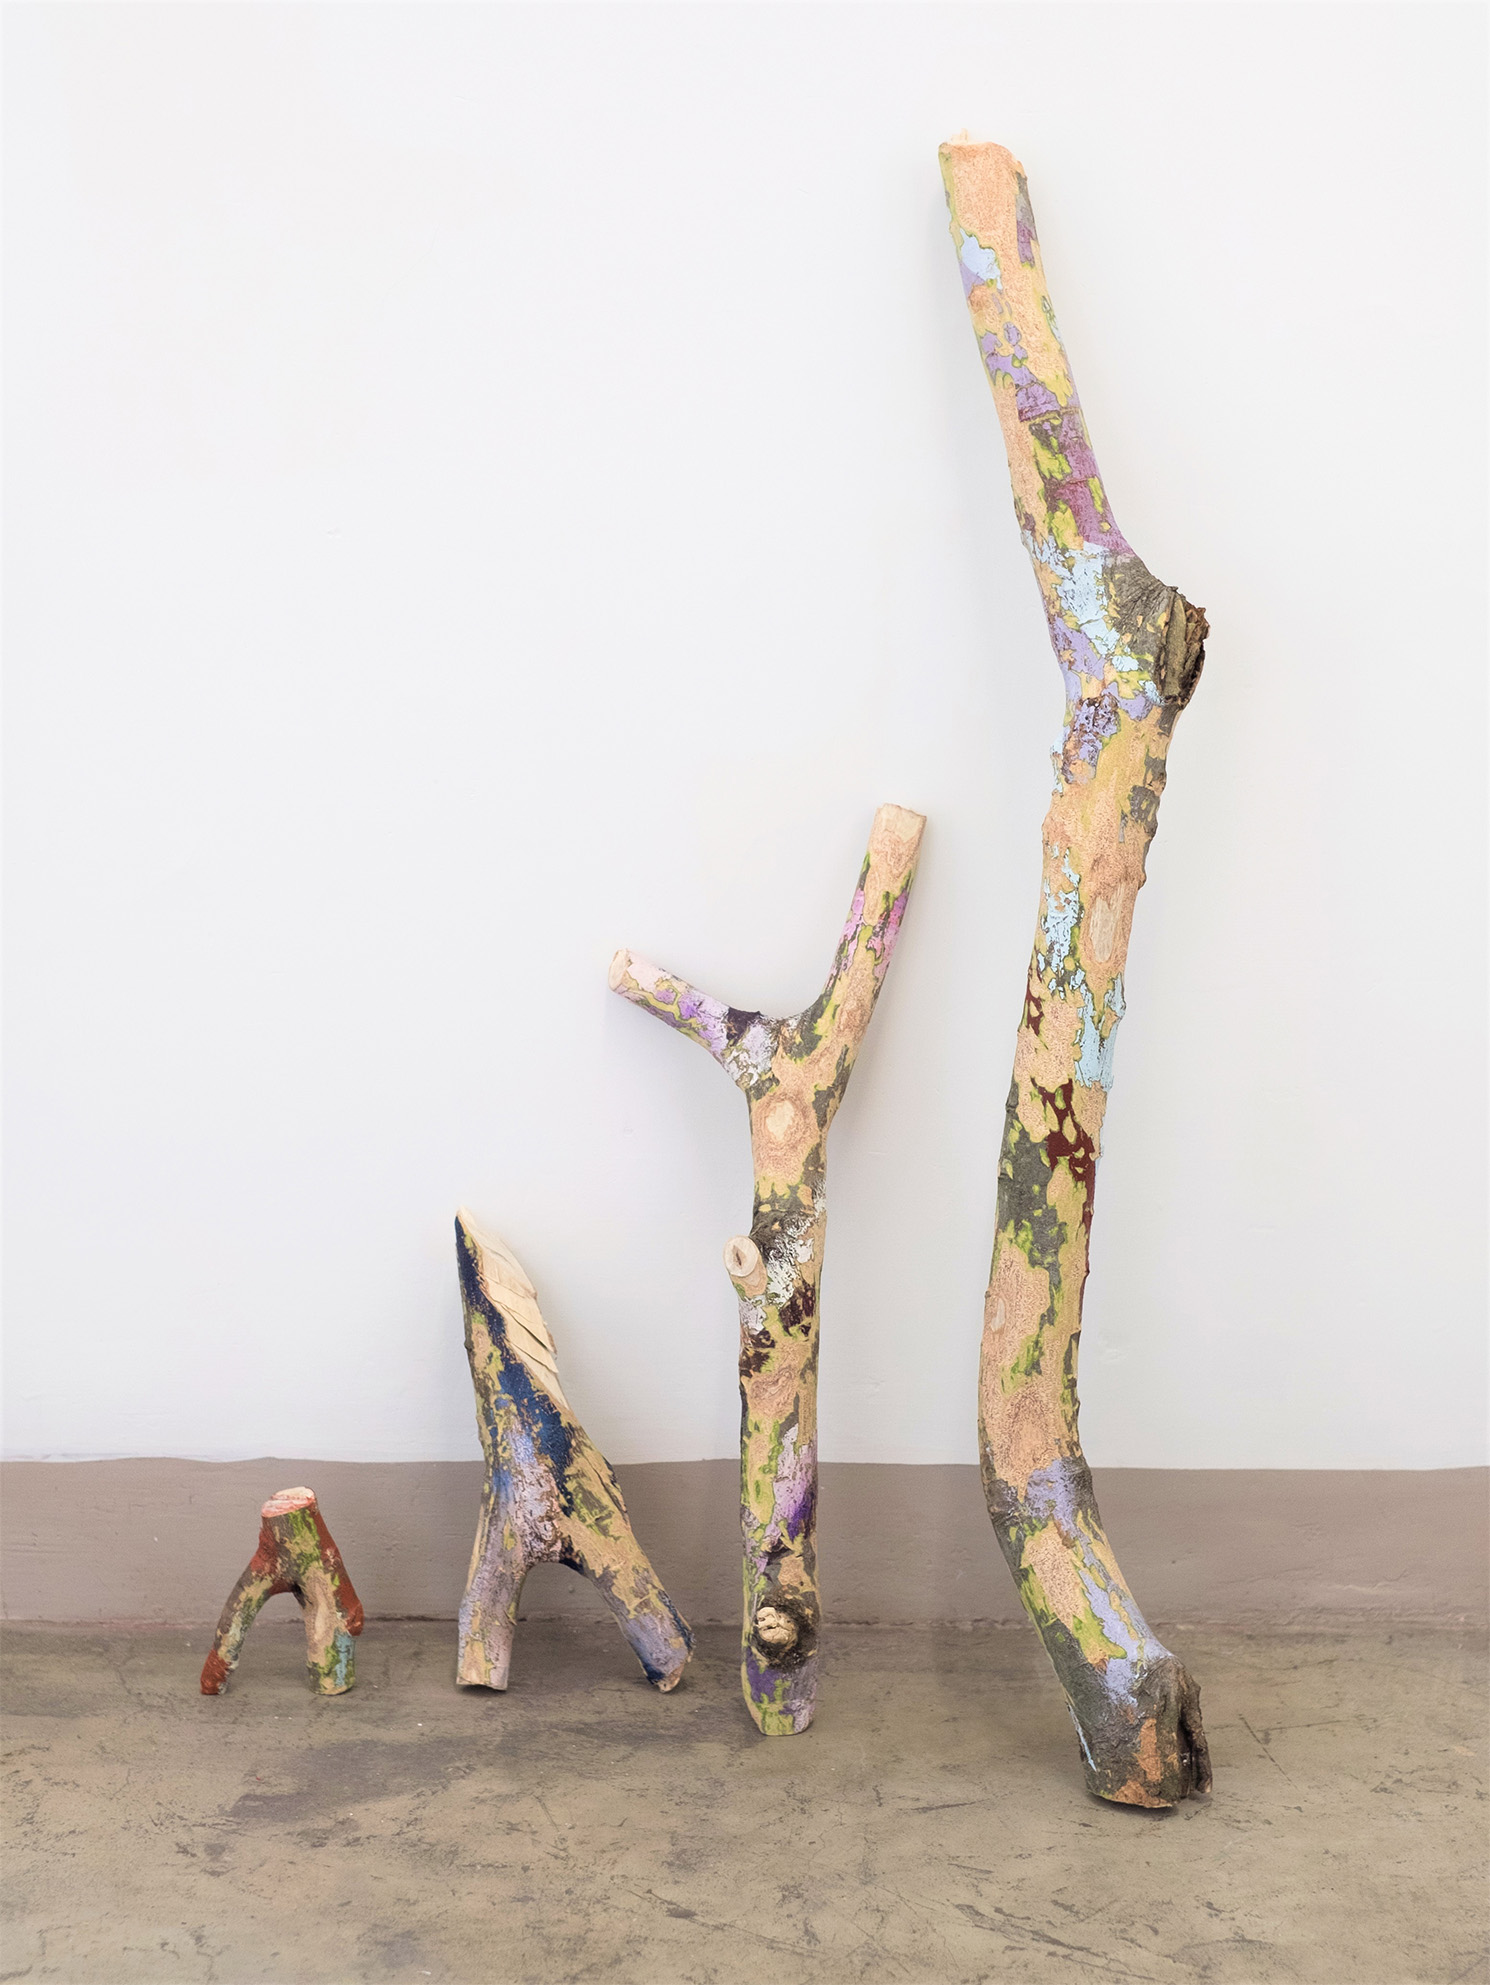  New Skin  Acrylic on wood branches  dimensions variable  2015 